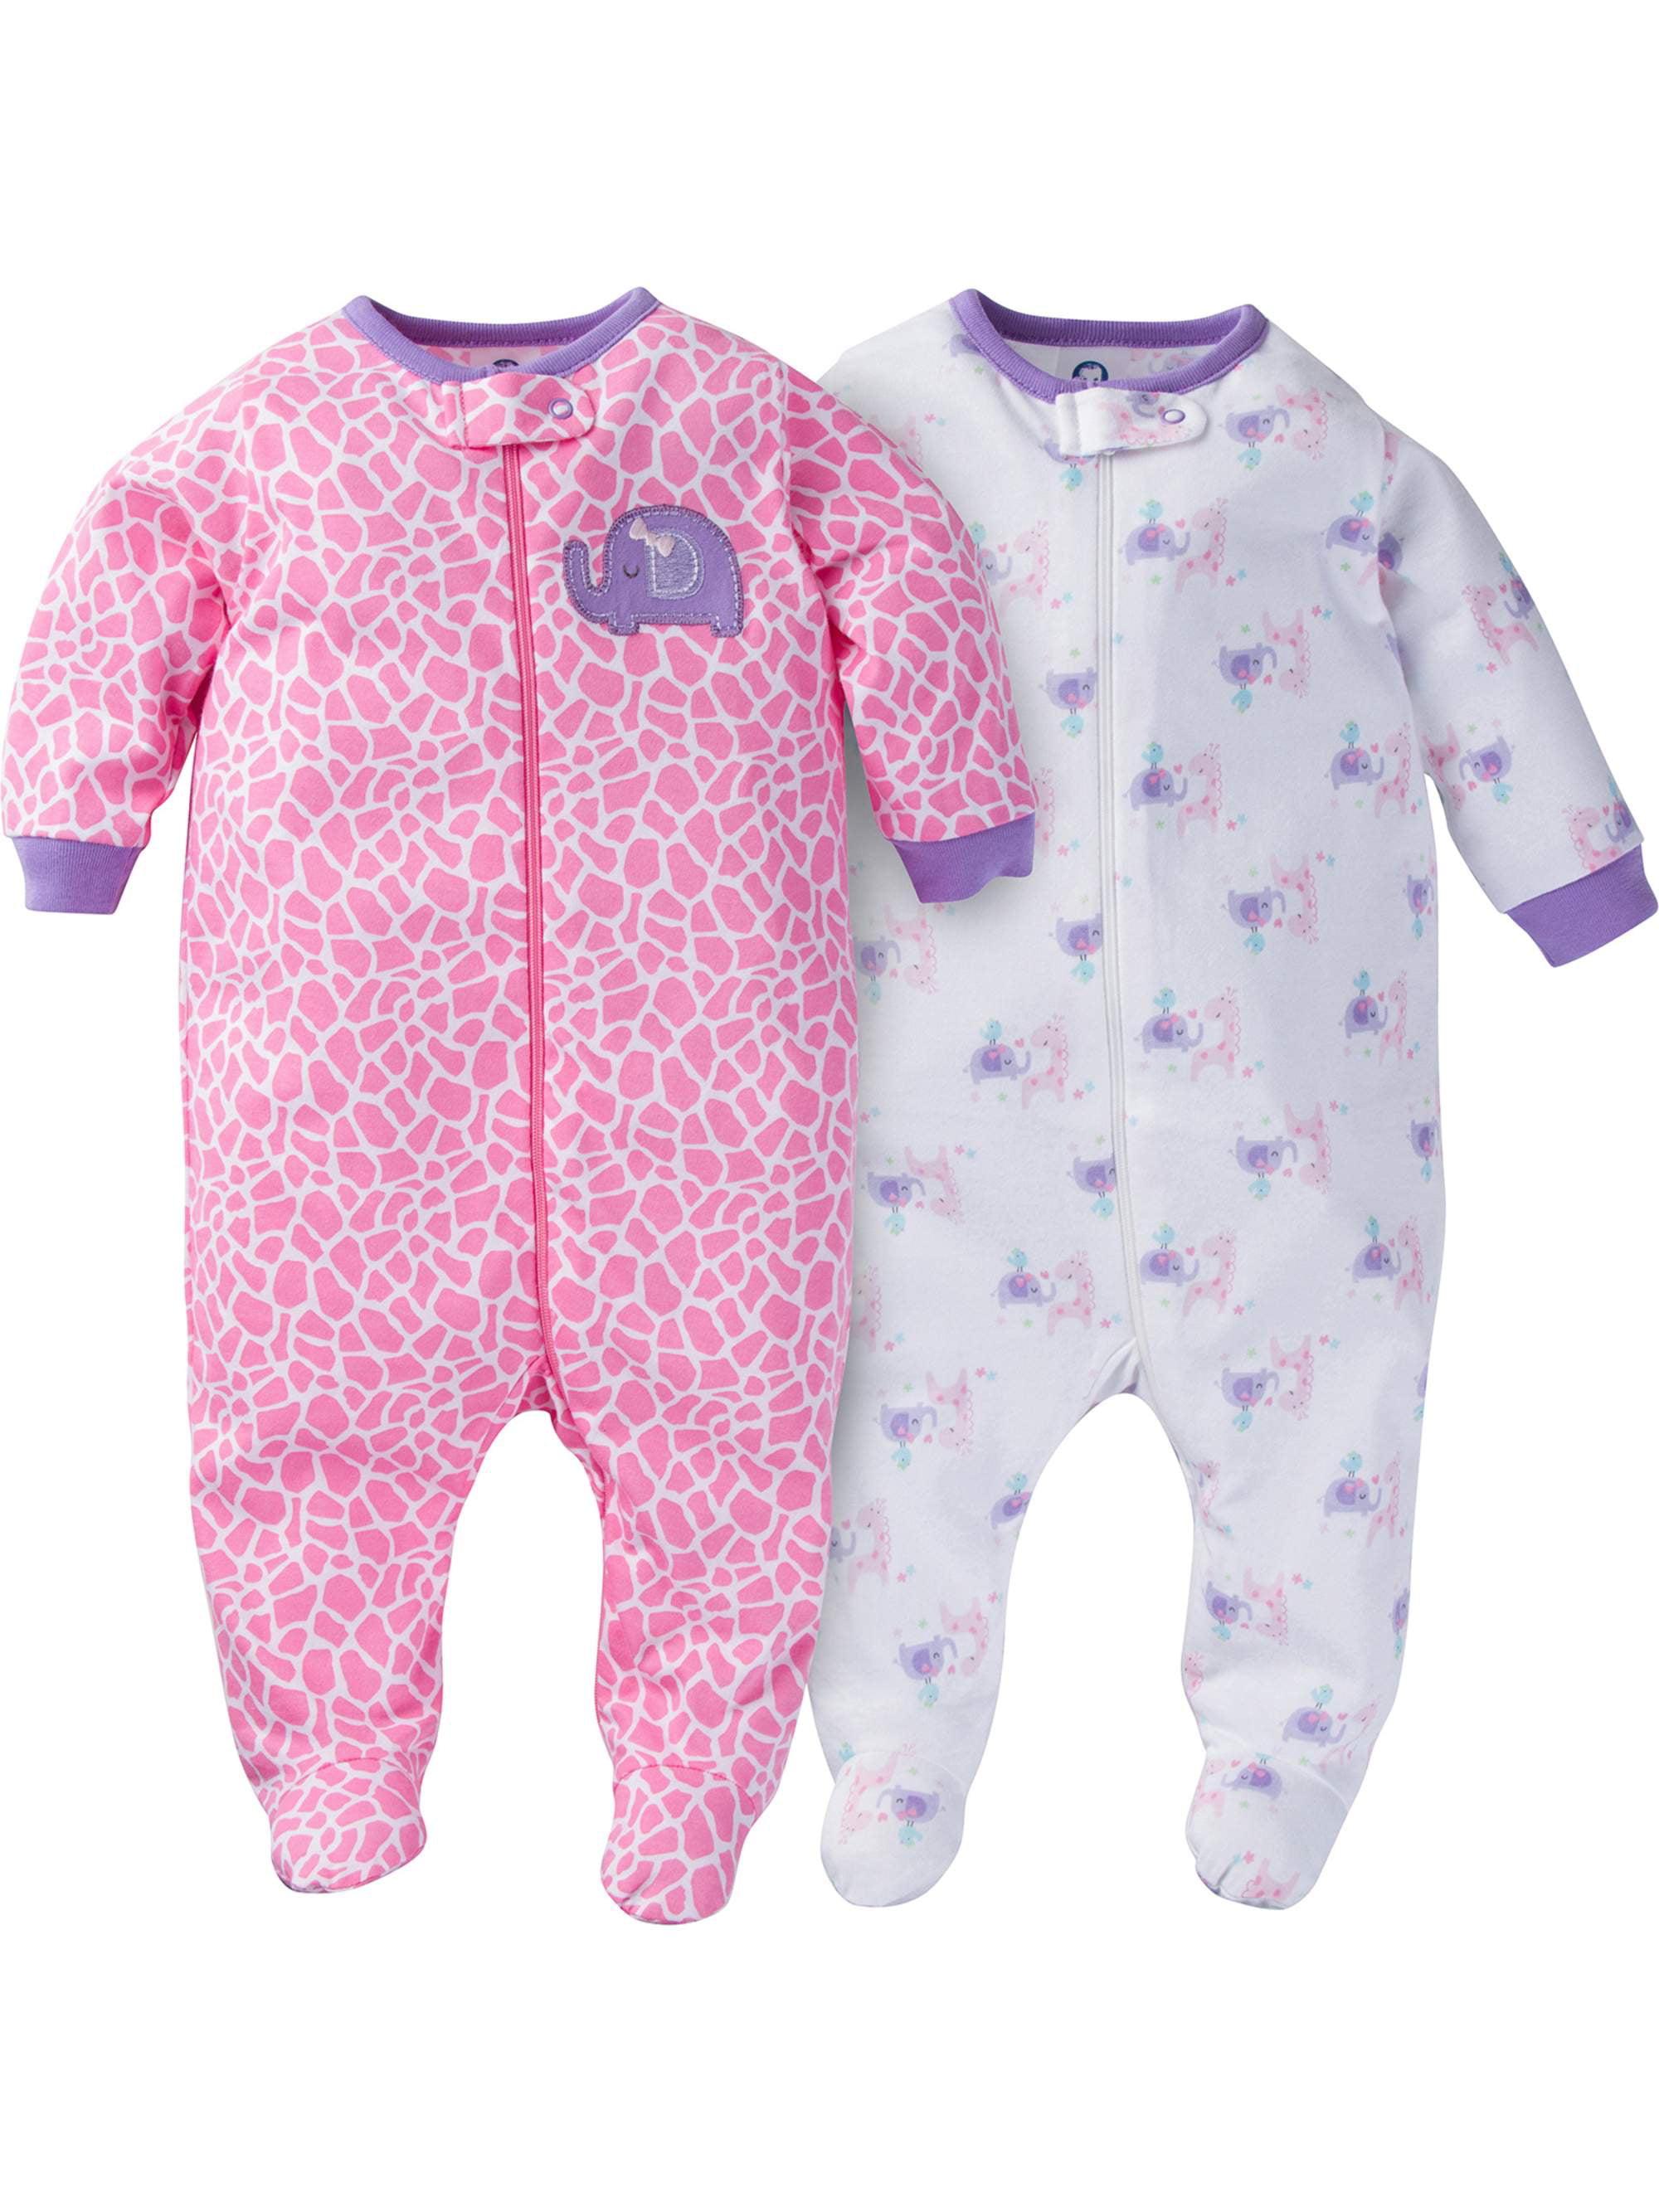 Essentials Unisex-Baby Baby Zip-Front Footed Sleep and Play Sleepers